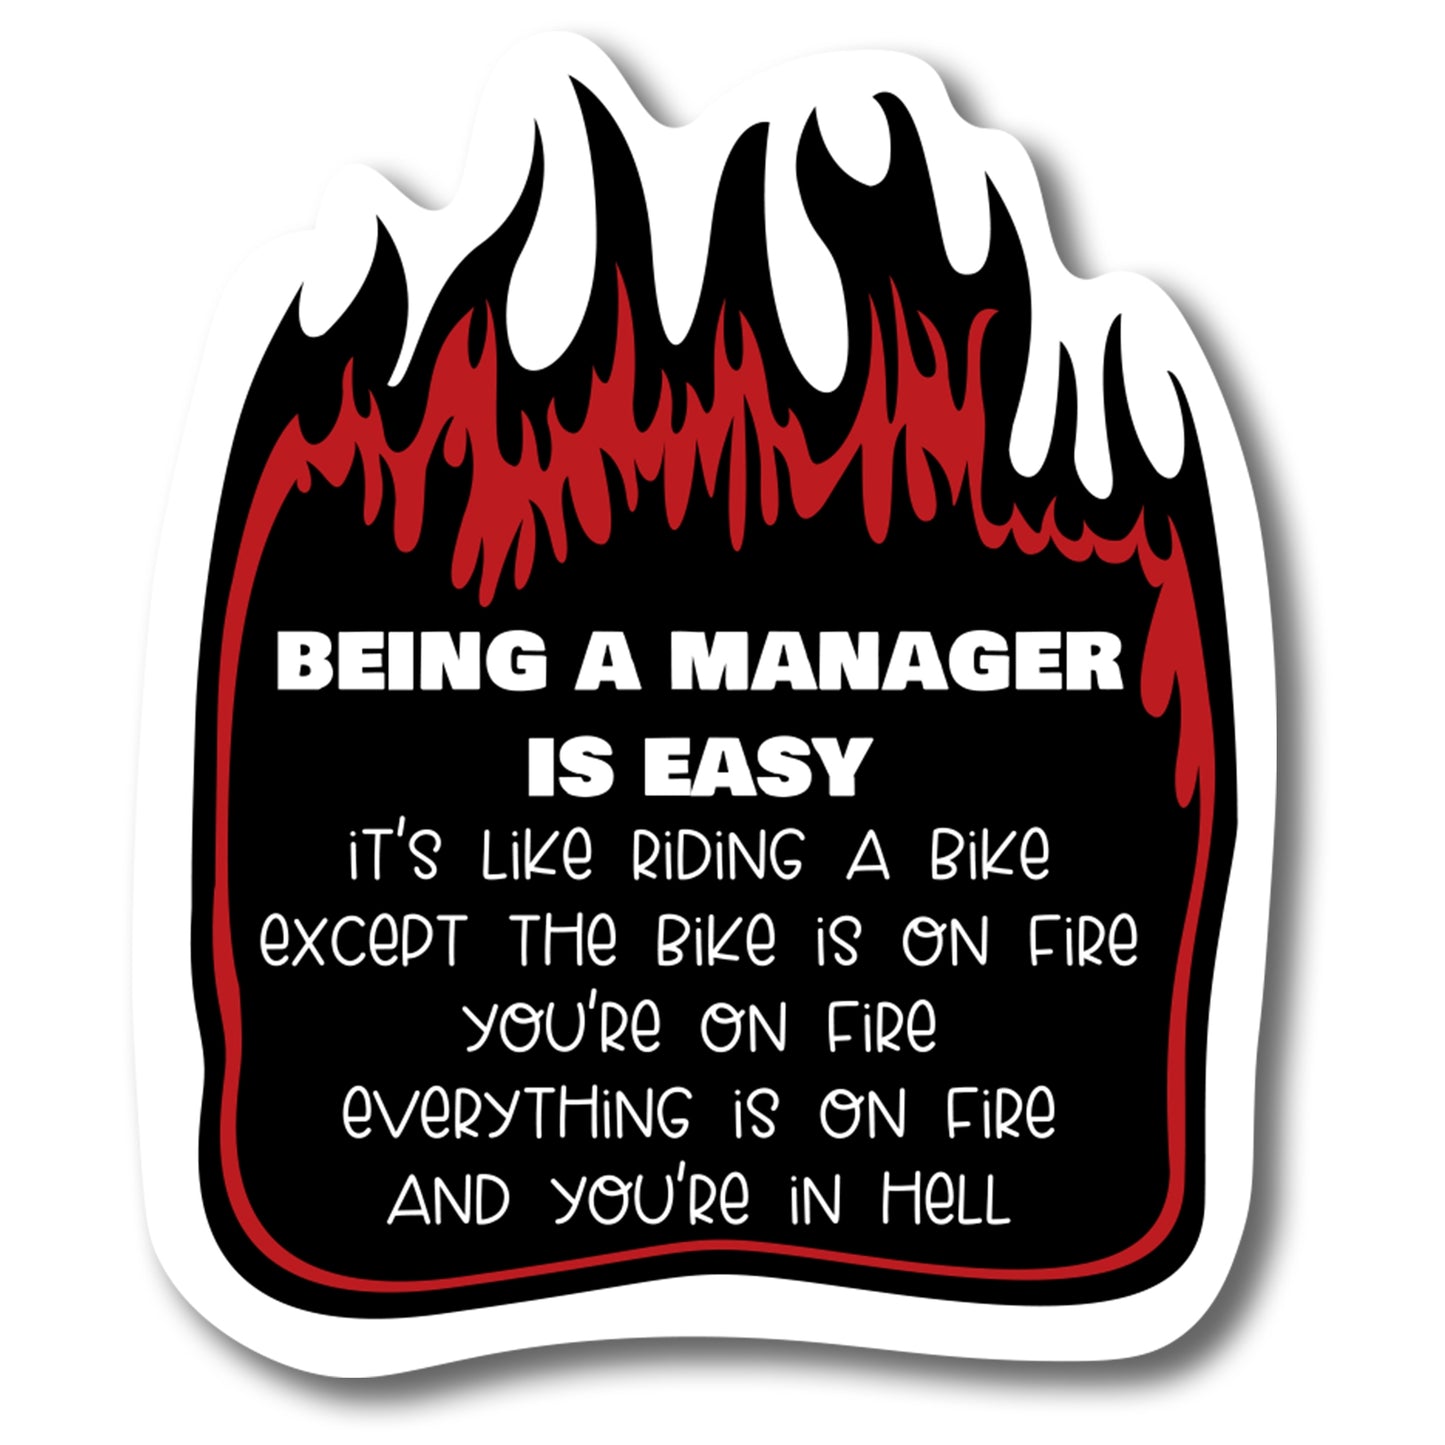 Magnet Me Up Sarcastic Being a Manager is Easy Magnet Decal, 6.5 Inch, Funny Gag Gift for Office, Great Gift Idea for Managers and Coworkers, for Refrigerator, Cubicle, or Filing Cabinet, Made in USA